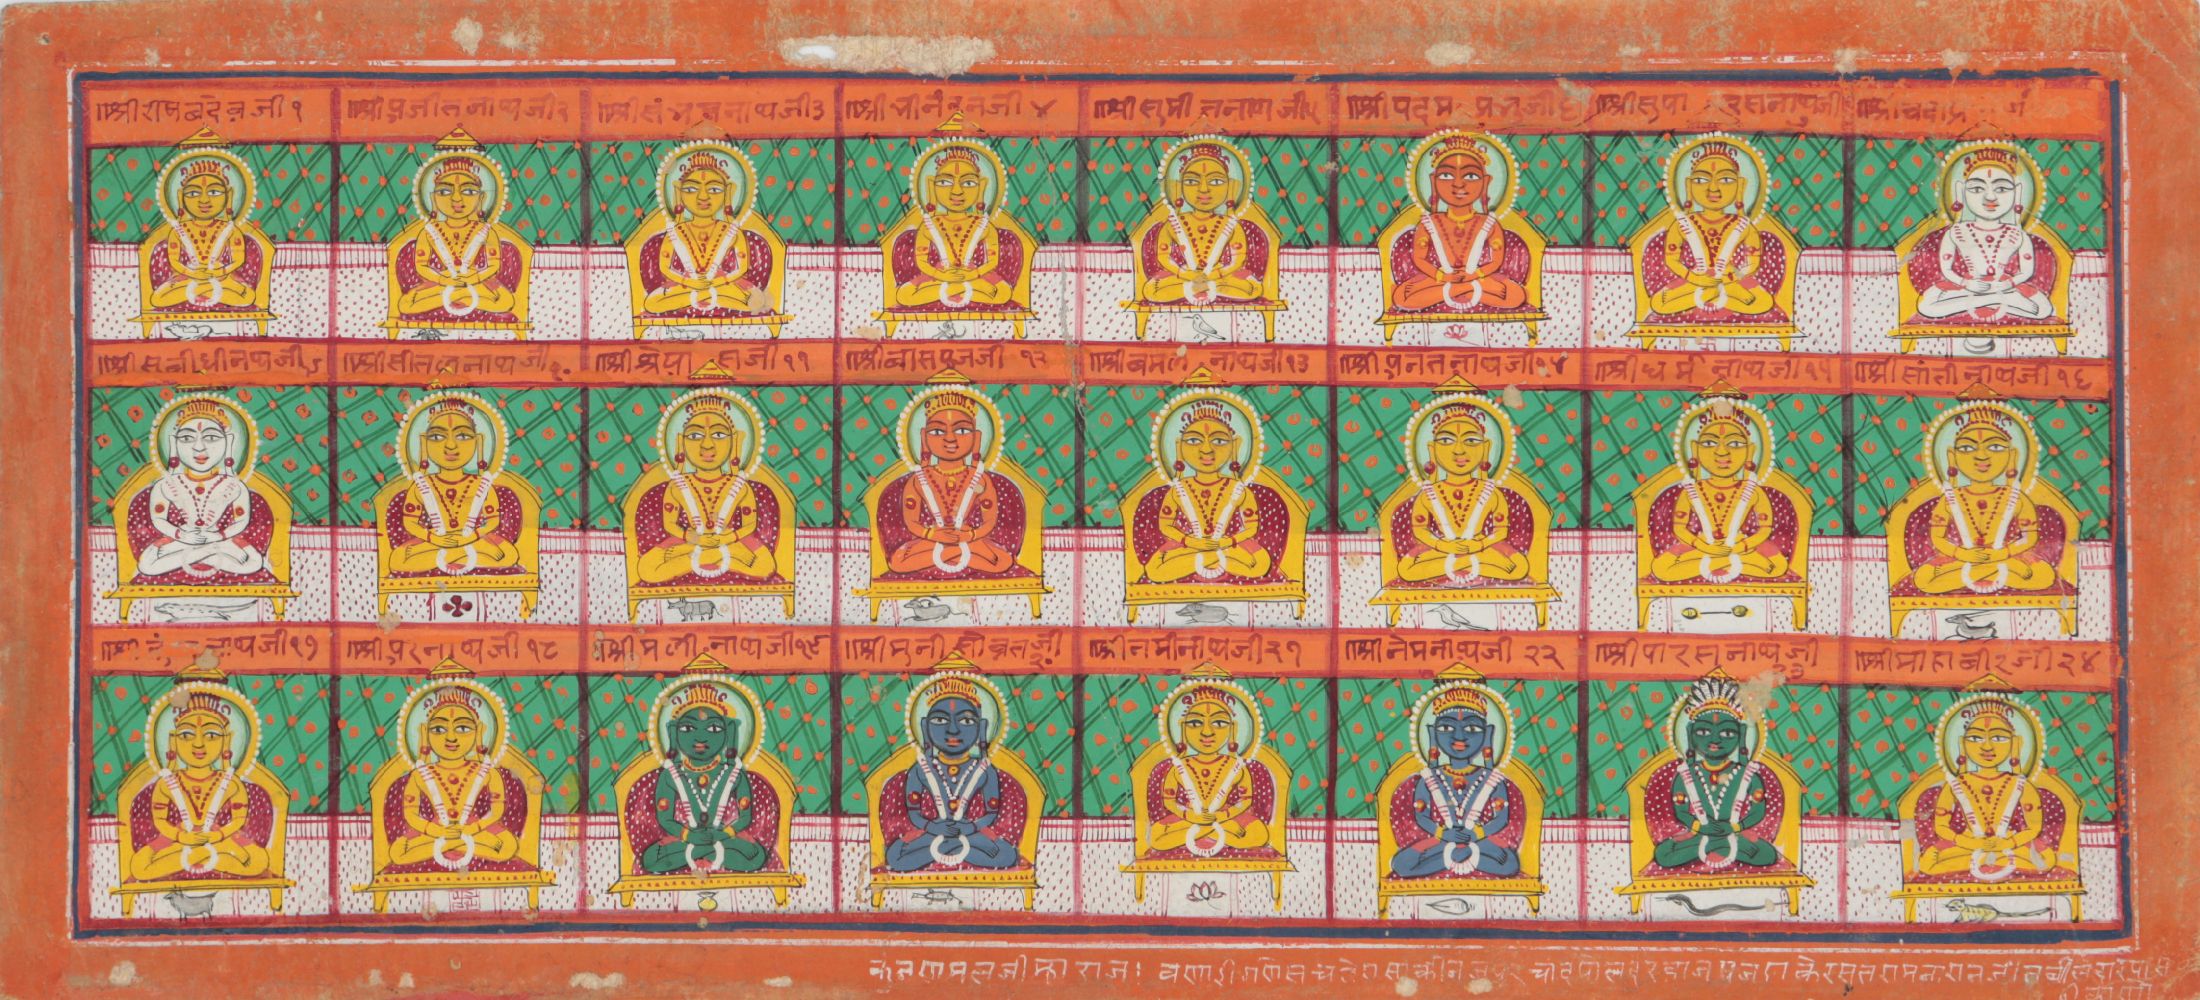 Jain priests, Rajasthan, India, 19th century, opaque pigments on paper, the painting featuring 24